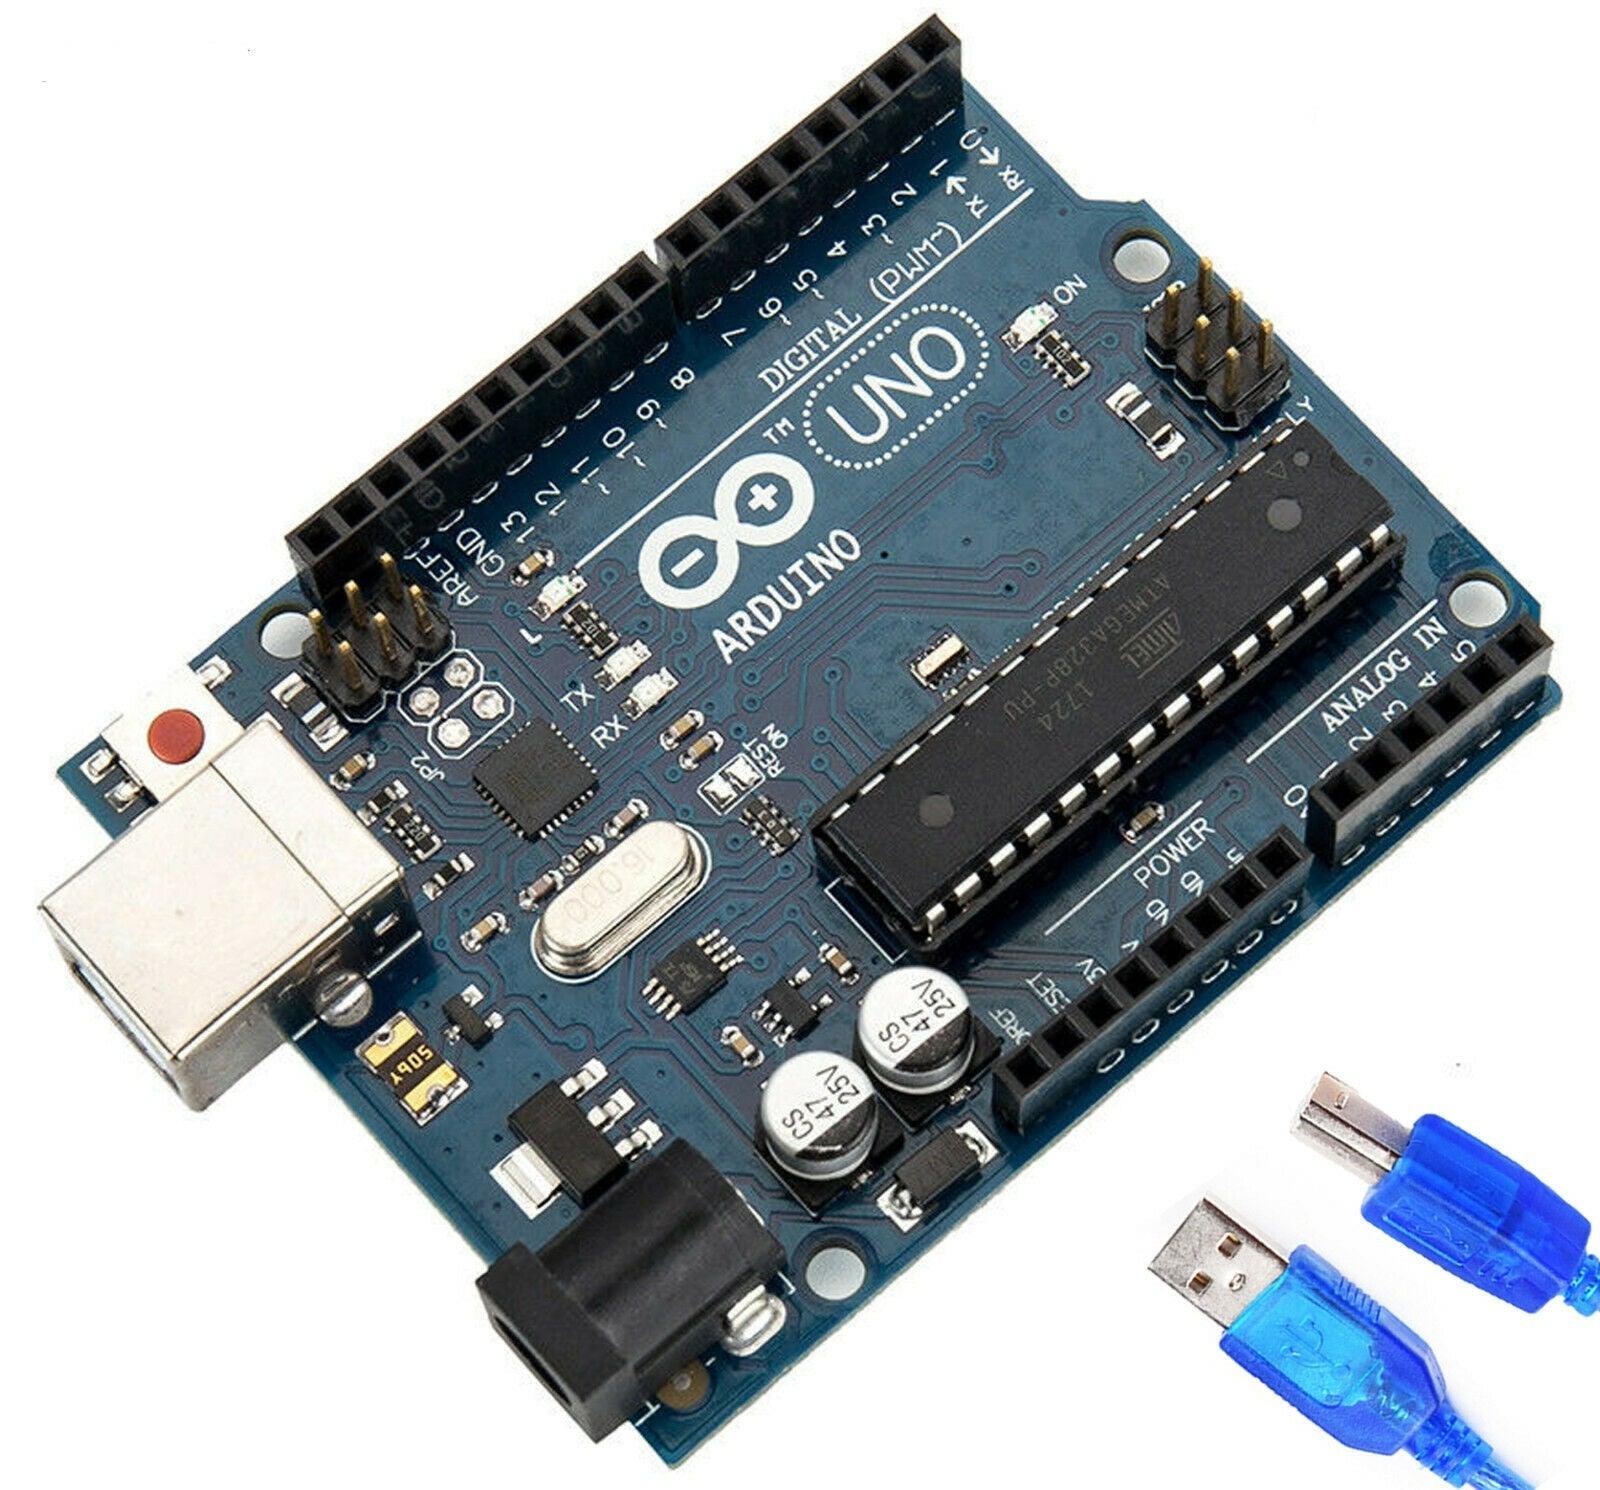 Generic Arduino Compatible Uno R3 Atmel ATmega328 Microcontroller Board With USB Cable - Office Catch